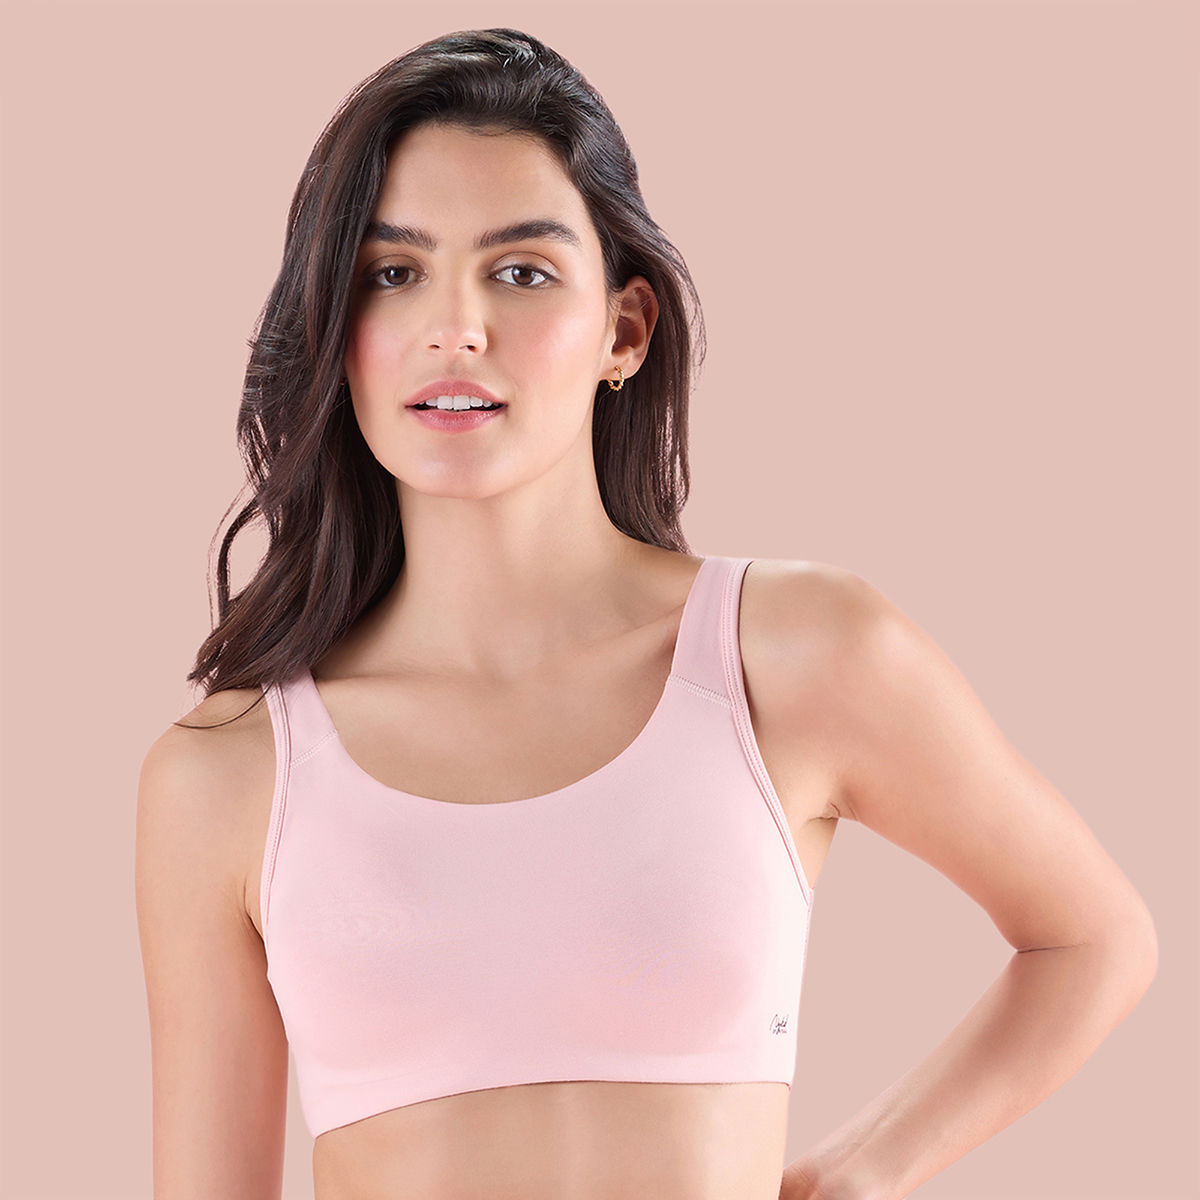 Nykd By Nykaa - Products Featured: ✨ Soft Cup Easy-Peasy Slip-On Bra with  Full Coverage in Black. ✨ Soft Cup Easy-Peasy Slip-On Bra with Full  Coverage in Brown. ✨ Soft Cup Easy-Peasy